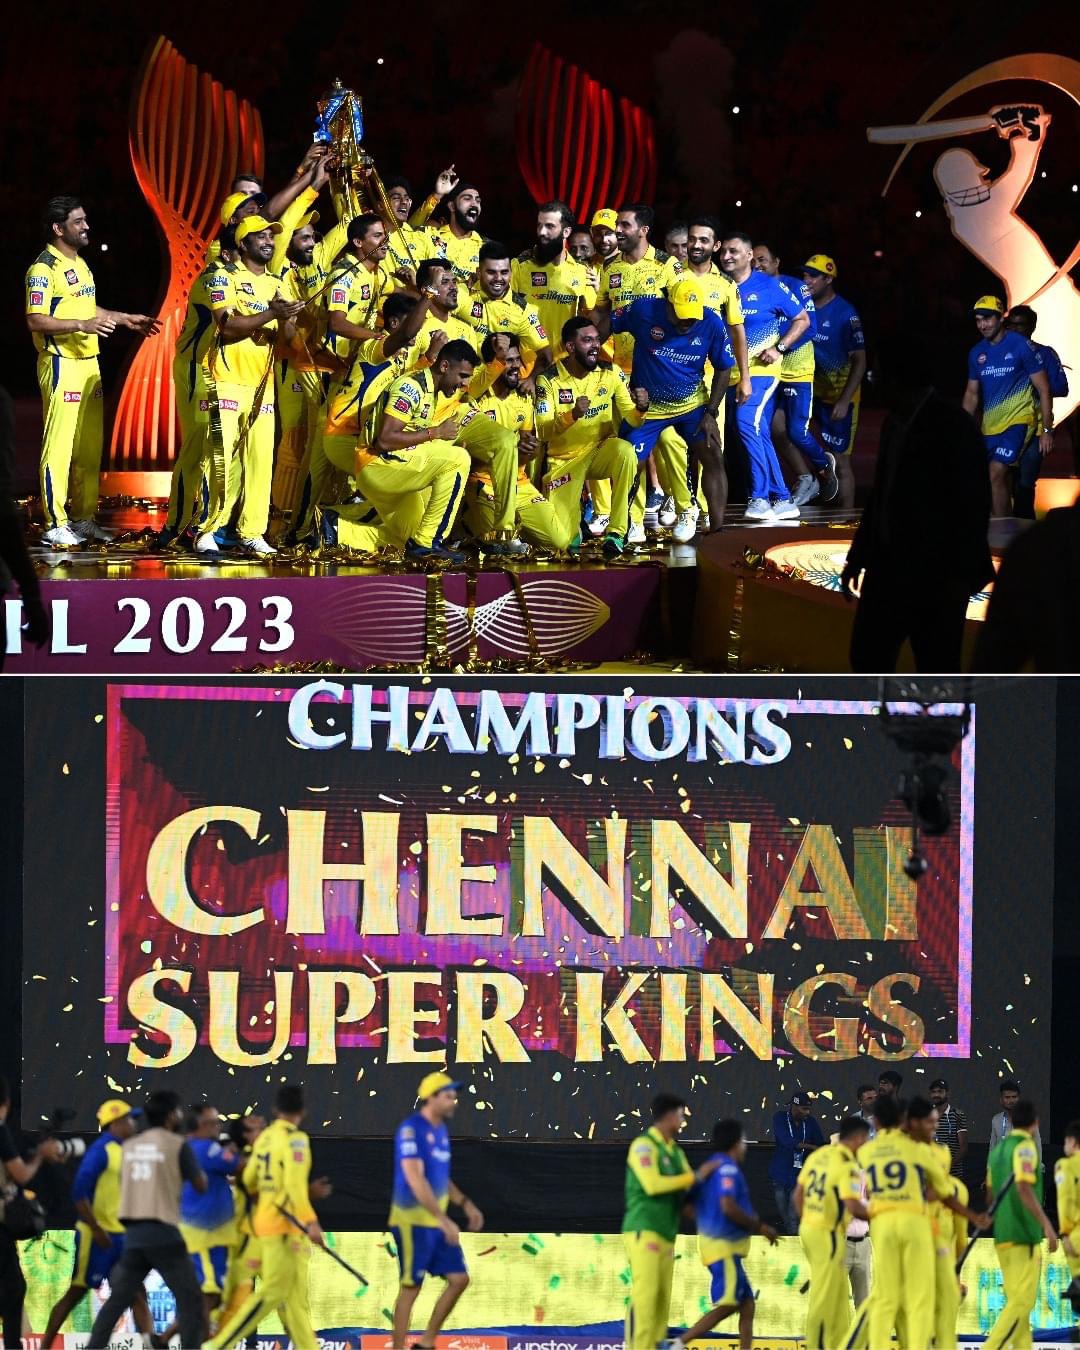 Winning Strategies: Management Lessons from Chennai Super Kings(CSK)